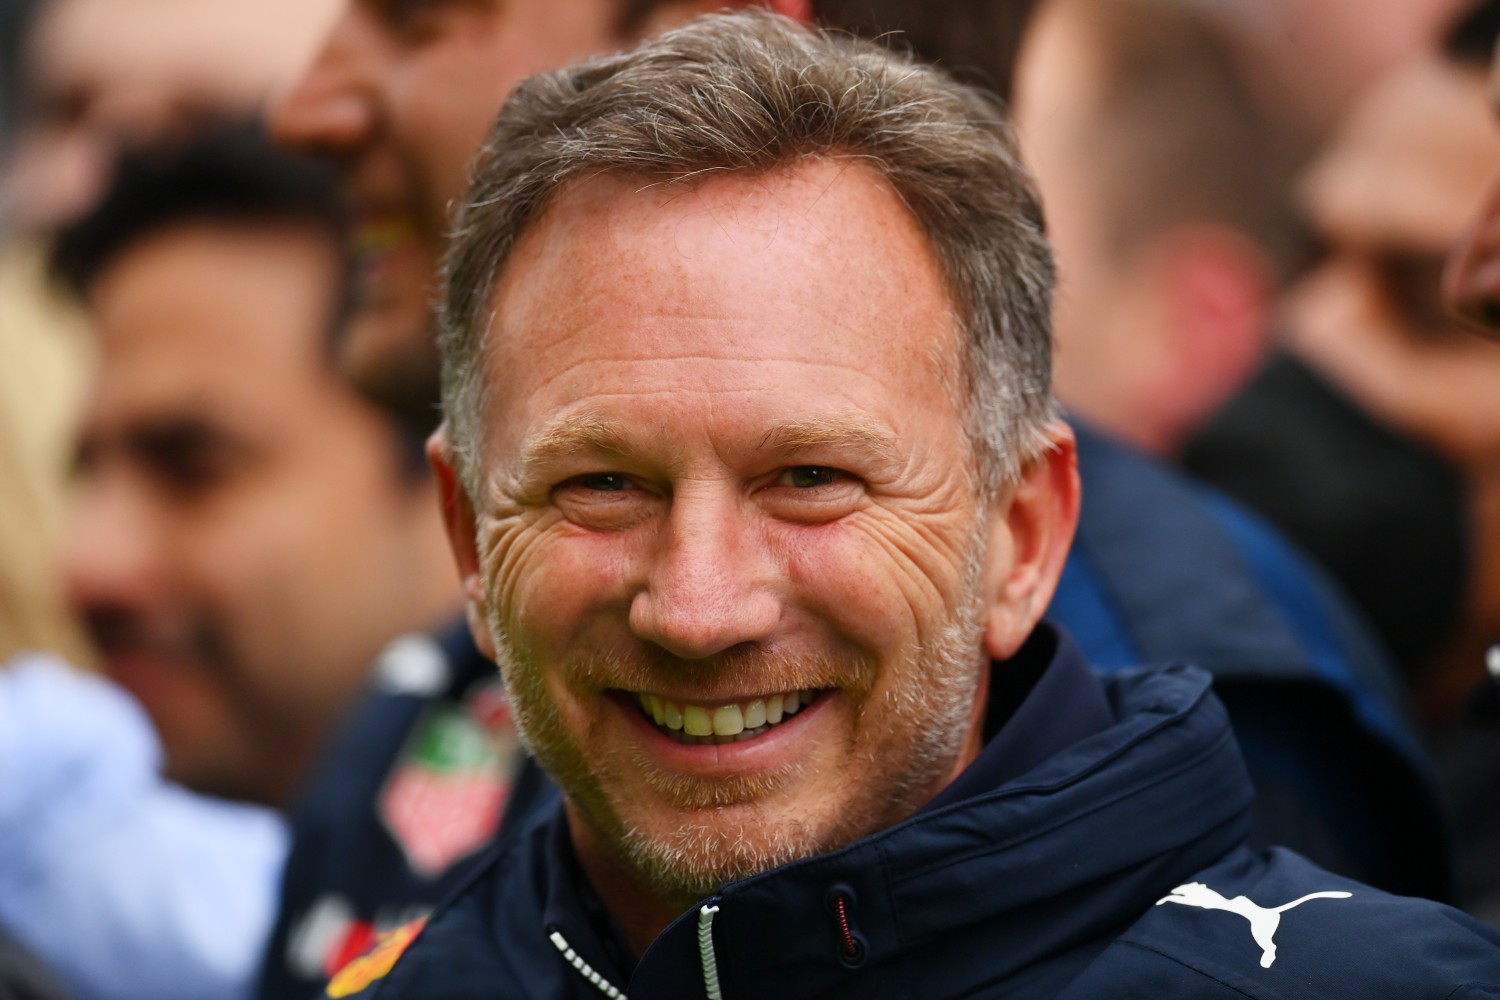 Red Bull Racing Team Principal Christian Horner smiles in parc ferme during the F1 Grand Prix of Emilia Romagna at Autodromo Enzo e Dino Ferrari on April 24, 2022 in Imola, Italy. (Photo by Dan Mullan/Getty Images)